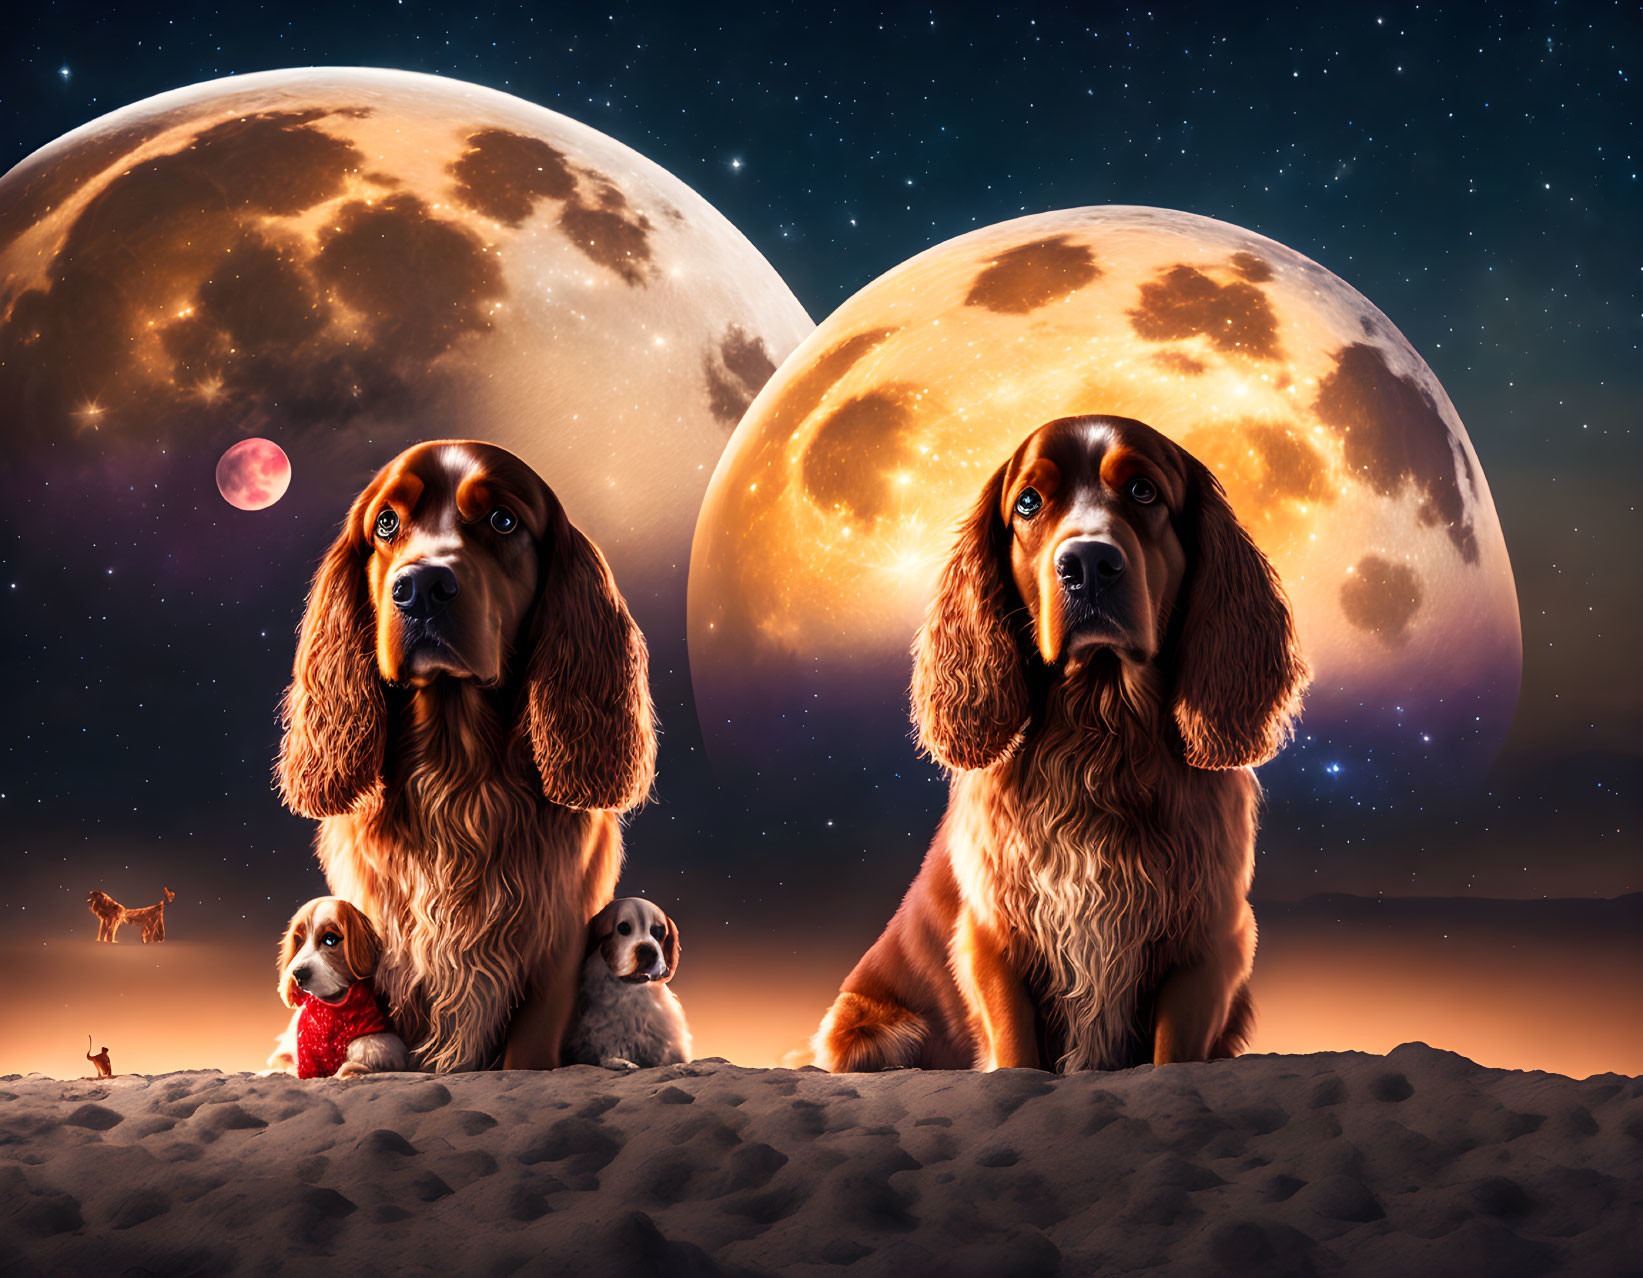 Four dogs under two moons in desert landscape with stars and planet